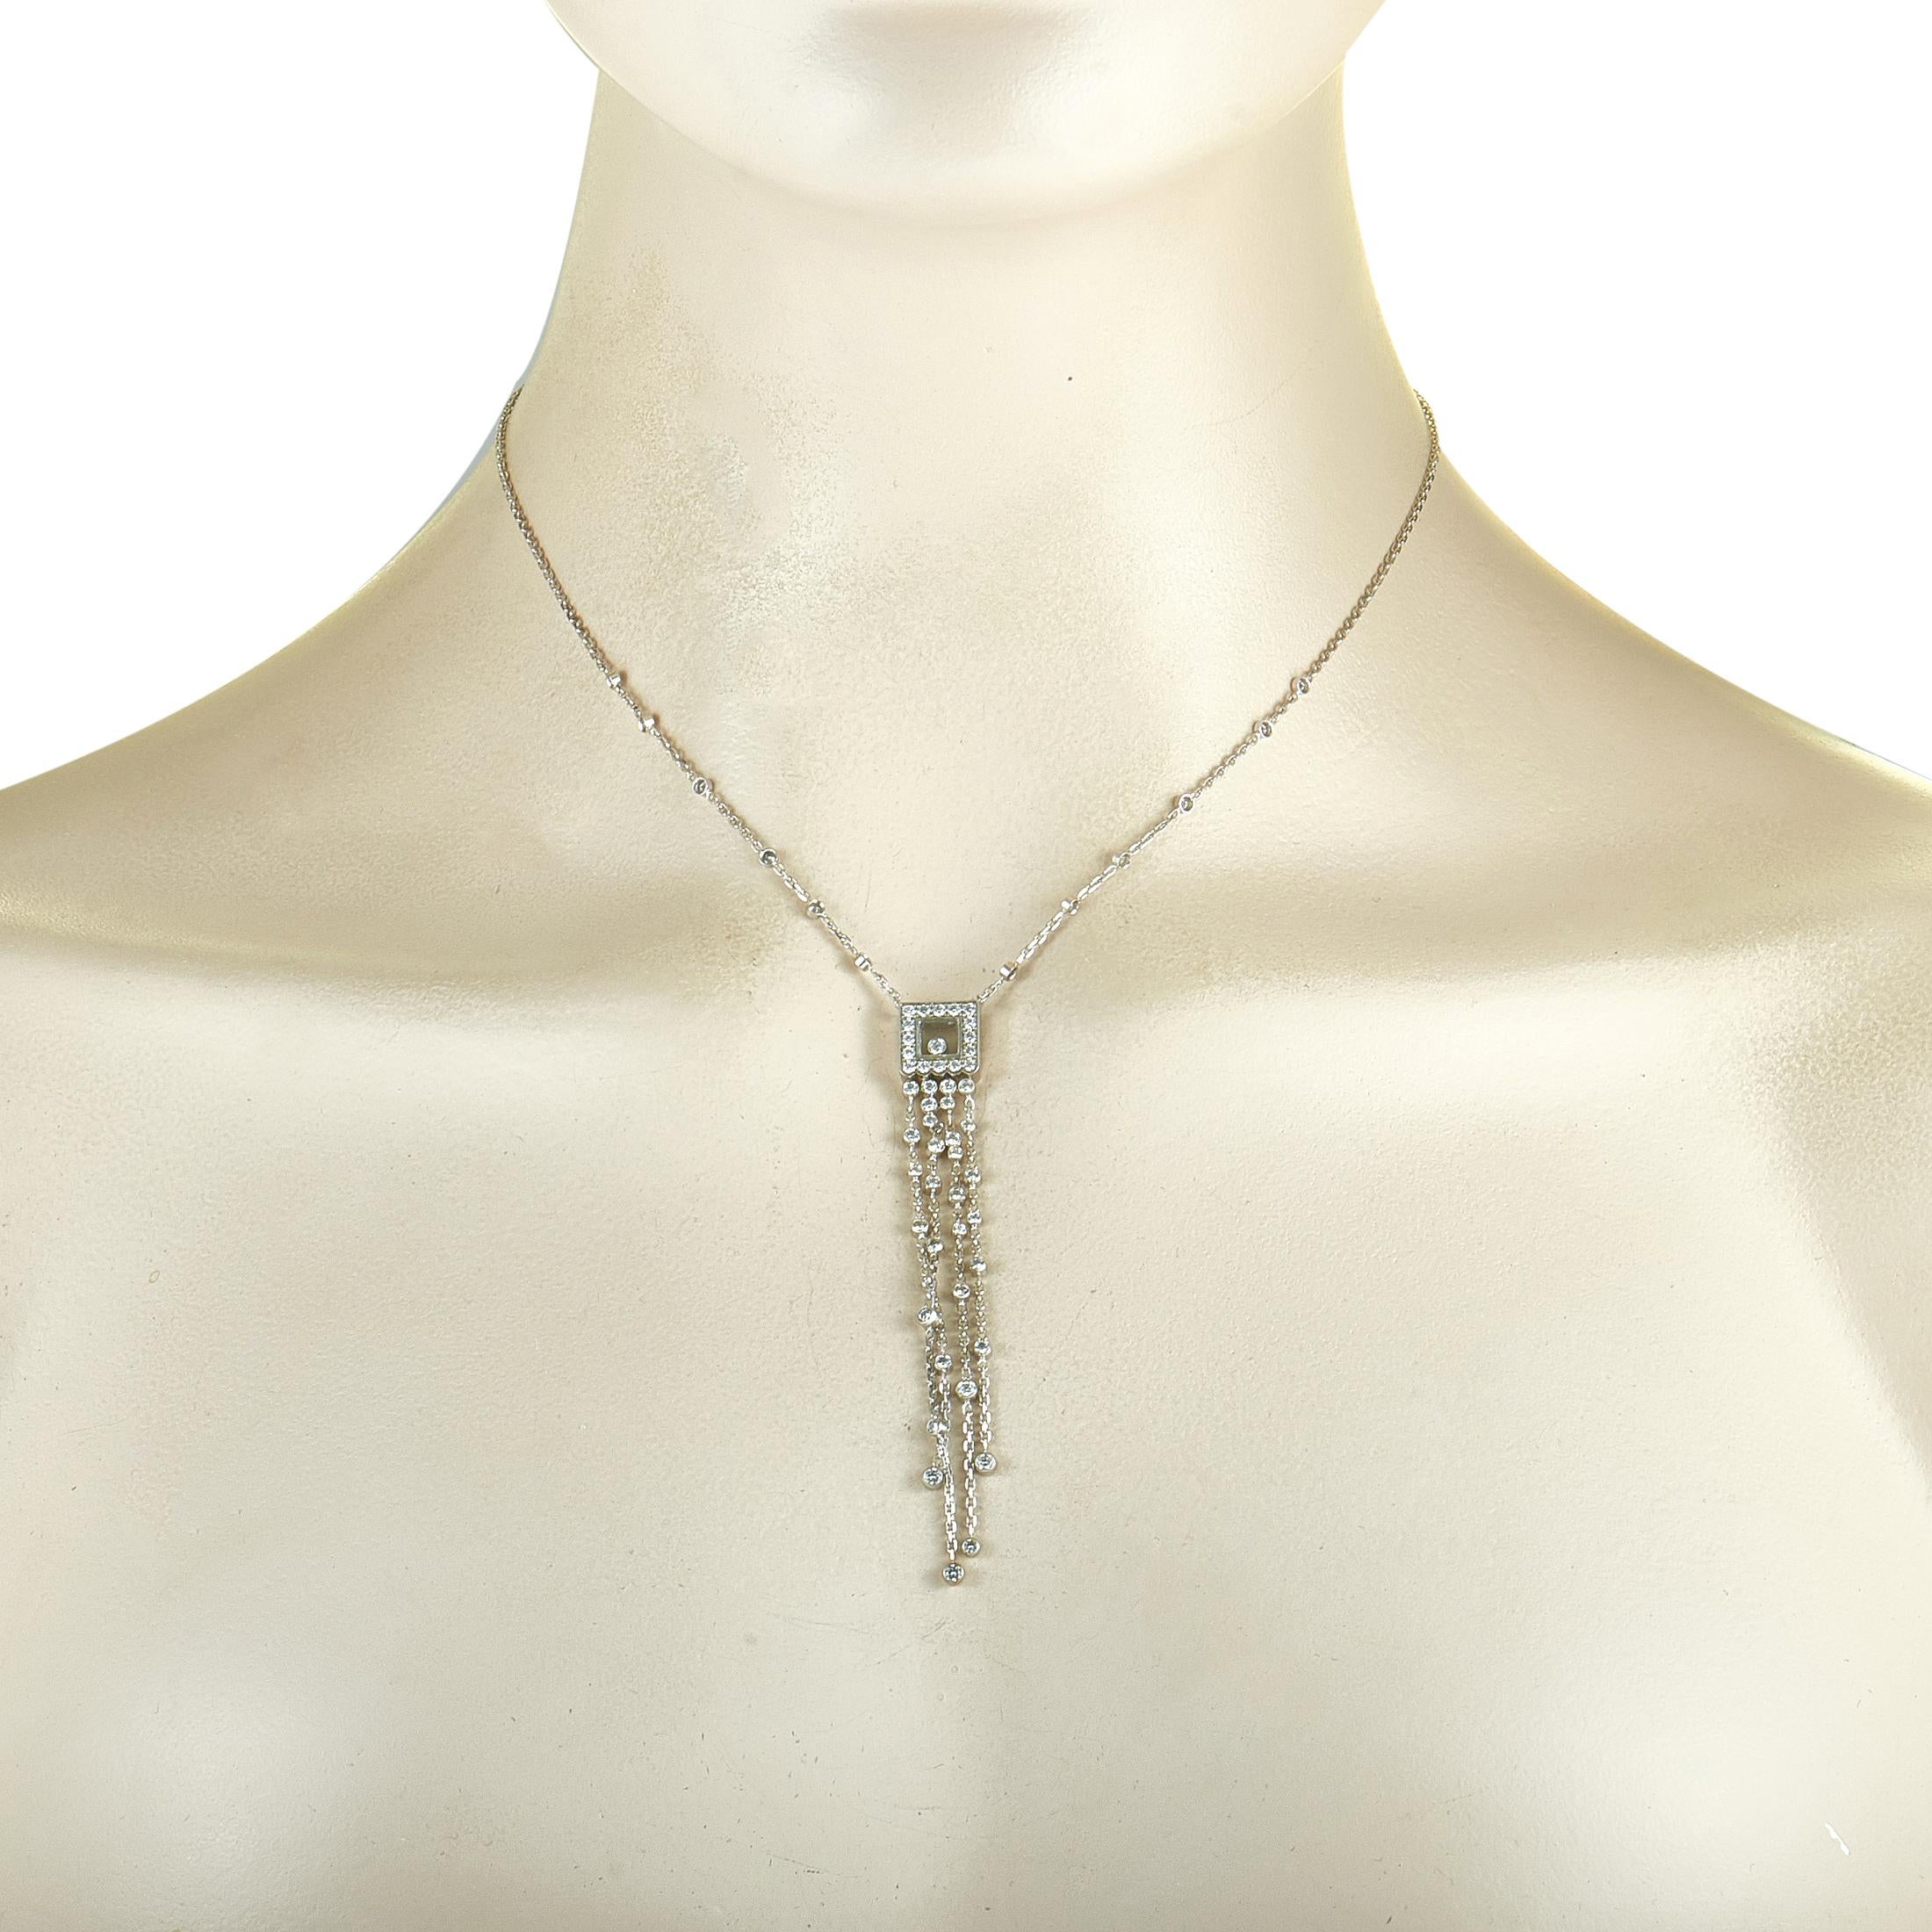 The Chopard “Happy Diamonds” necklace is crafted from 18K white gold, boasting a 14” chain with lobster claw closure and a pendant that measures 3.25” in length and 0.37” in width. The necklace weighs 10.5 grams and is set with a total of 1.63